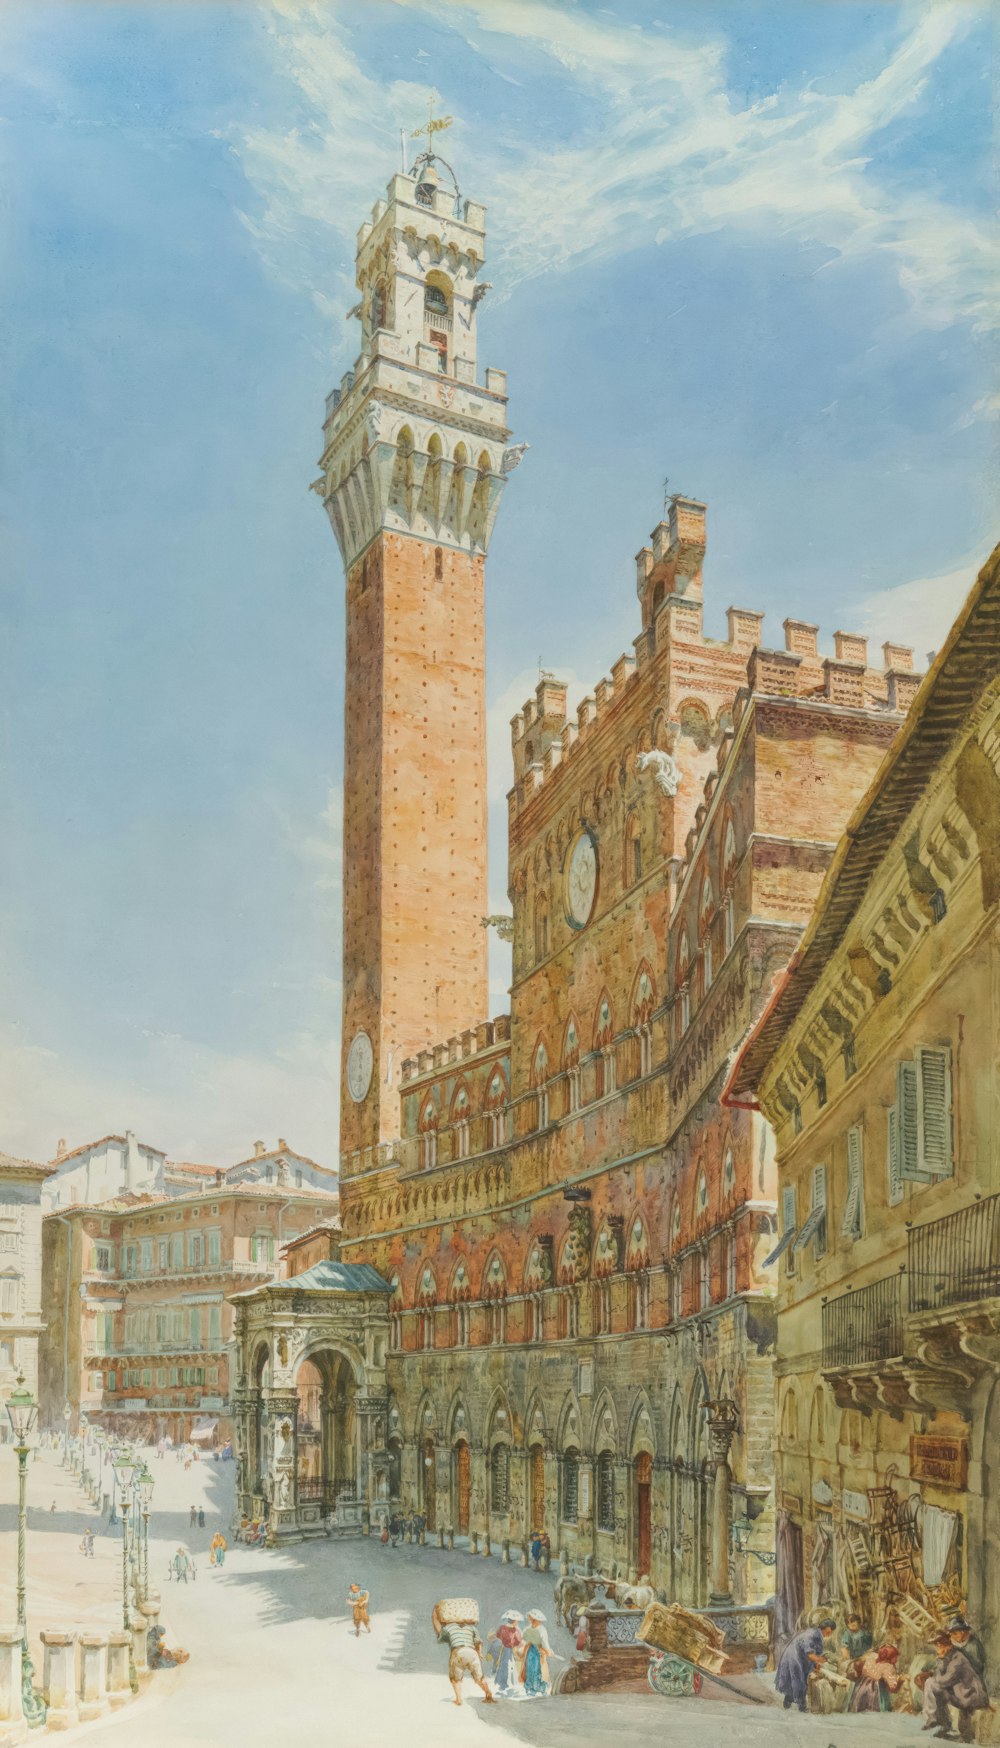 a painting of a clock tower in a city